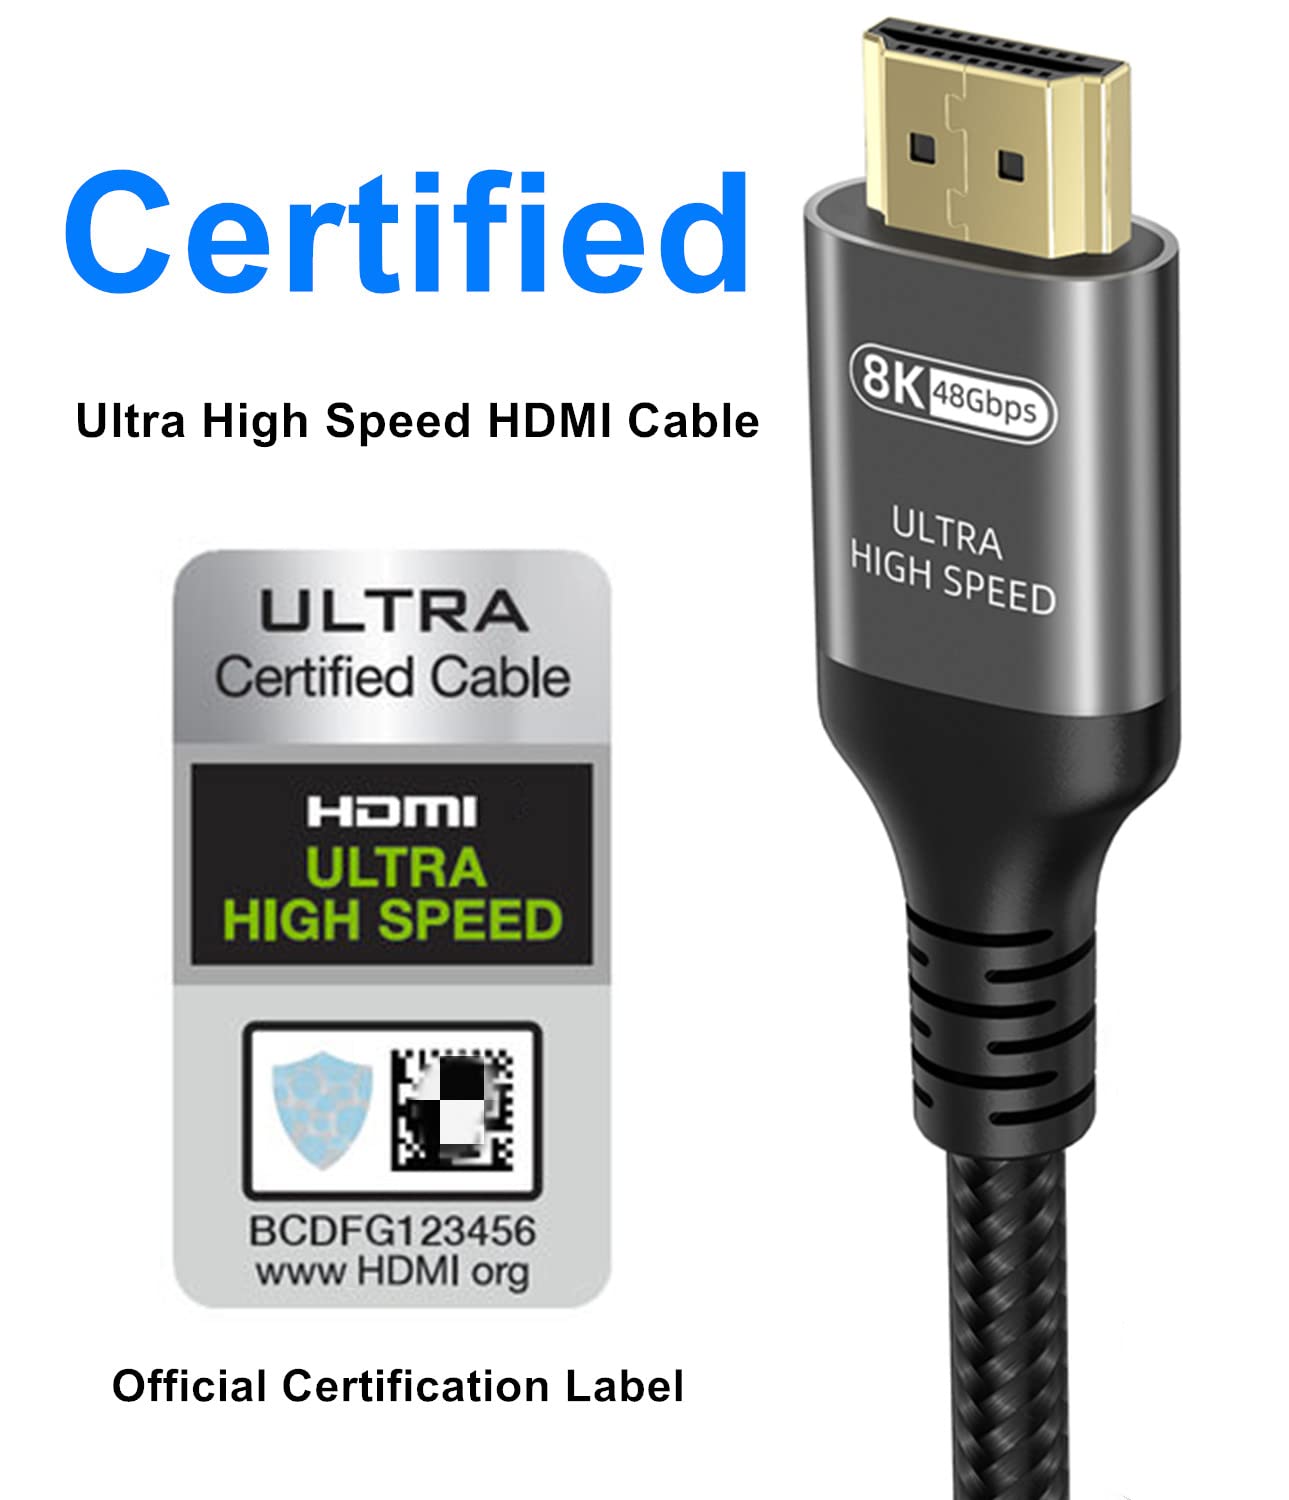 10k 8k 4k HDMI Cable 6.6 FT, Certified 48Gbps 1ms Ultra High Speed HDMI 2.1 Cable 4k 120Hz 144Hz 8k 60Hz 12bit ARC eARC DTS:X Dolby Atmos HDR10 Compatible for Mac Soundbar Gaming PC RTX3090 PS5 4 Xbox